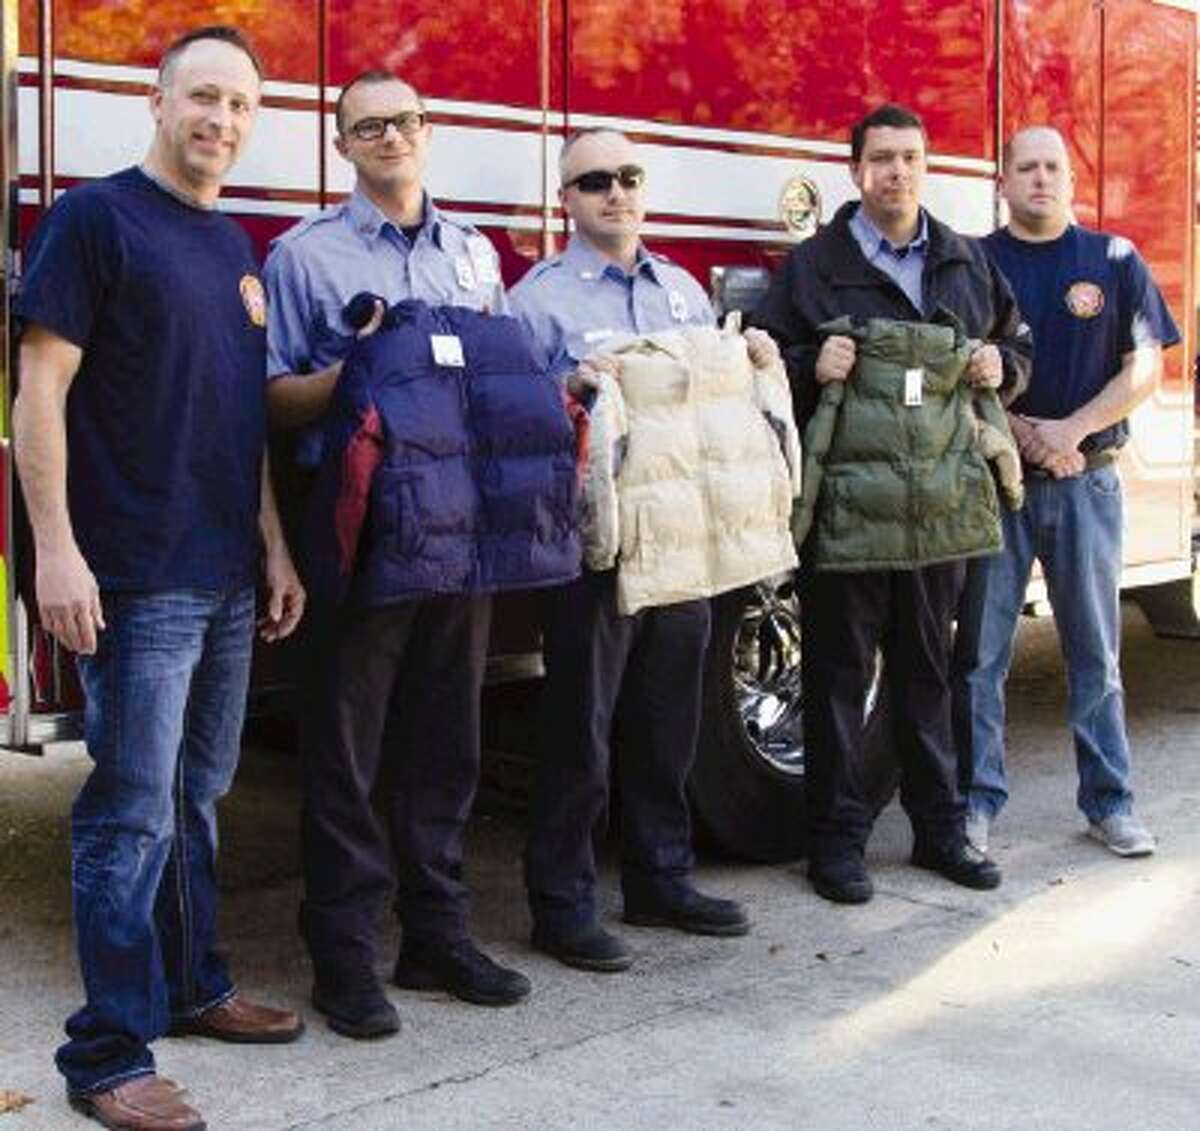 Lt. Lloyd Sandefer, Joseph Maddox, Sean Semora, Cory Neitzel and Bobby Allen, of Conroe Fire Station 3, prepare to leave the station to distribute about 25 winter coats to students from Milam Elementary School in Conroe Monday. This is the station’s first year participating in the Coats for Kids Foundation. Firefighters from all over the United States and Canada partake in the event.